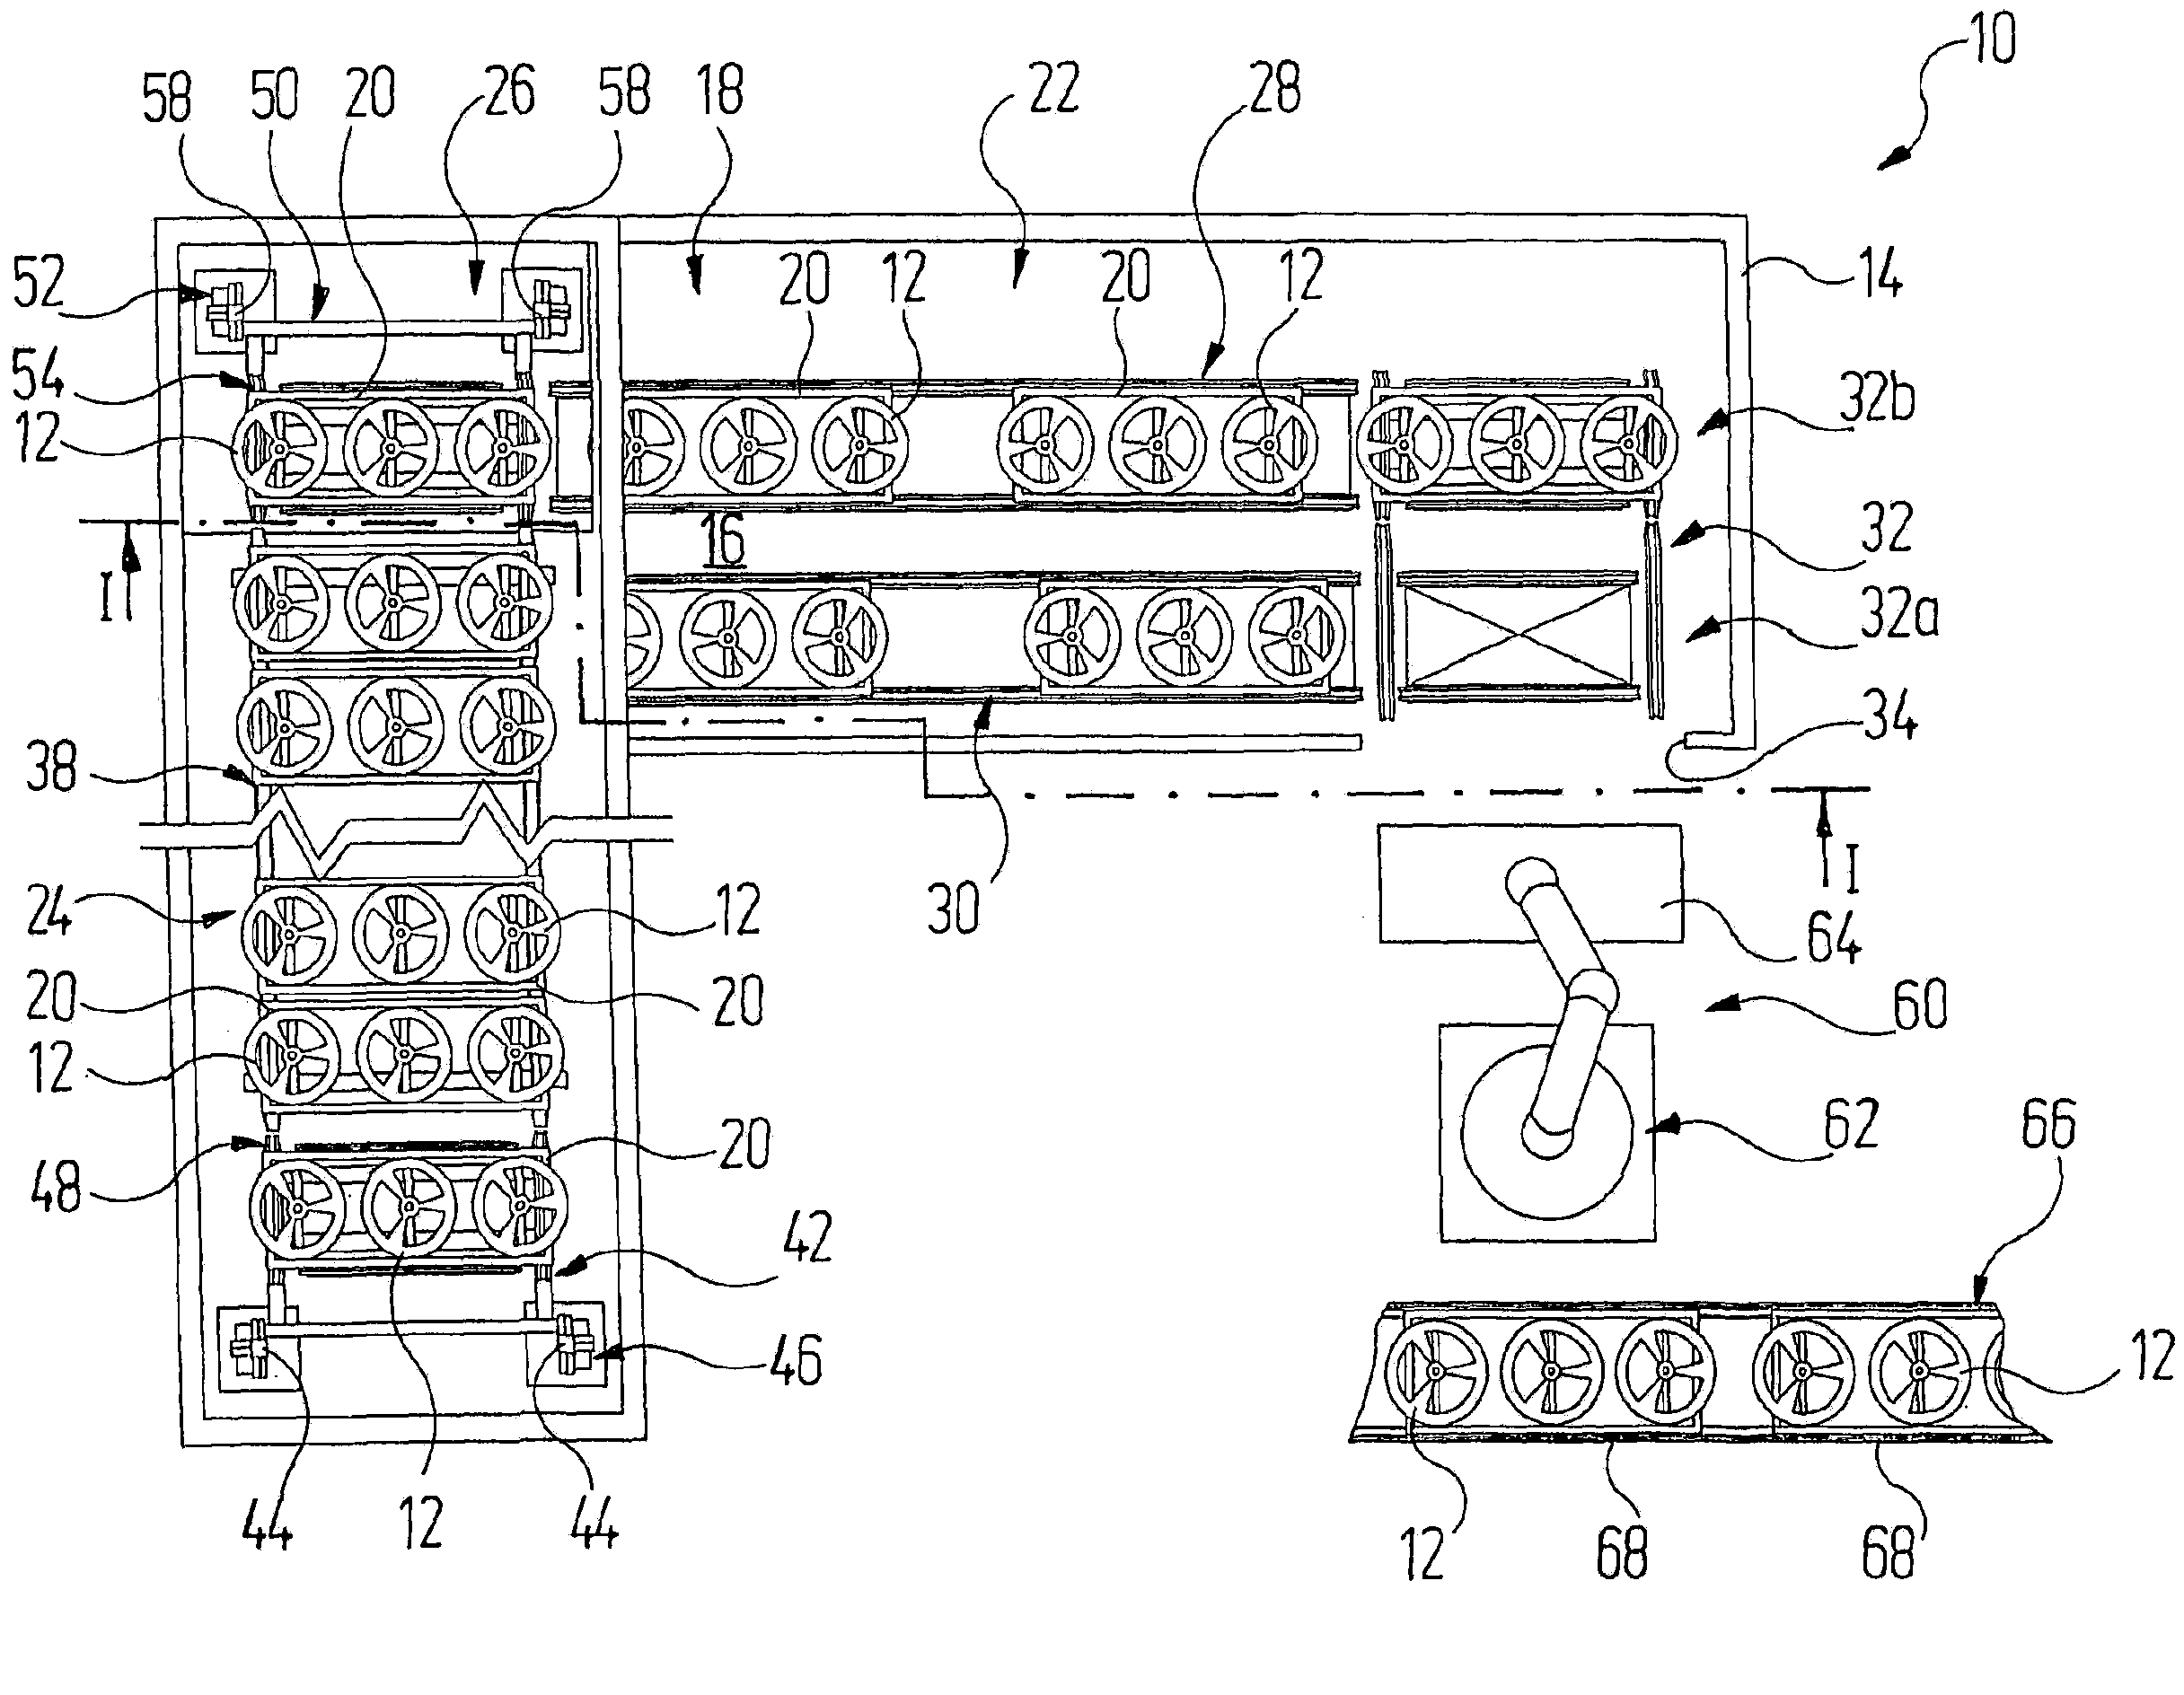 Device and method for drying work pieces